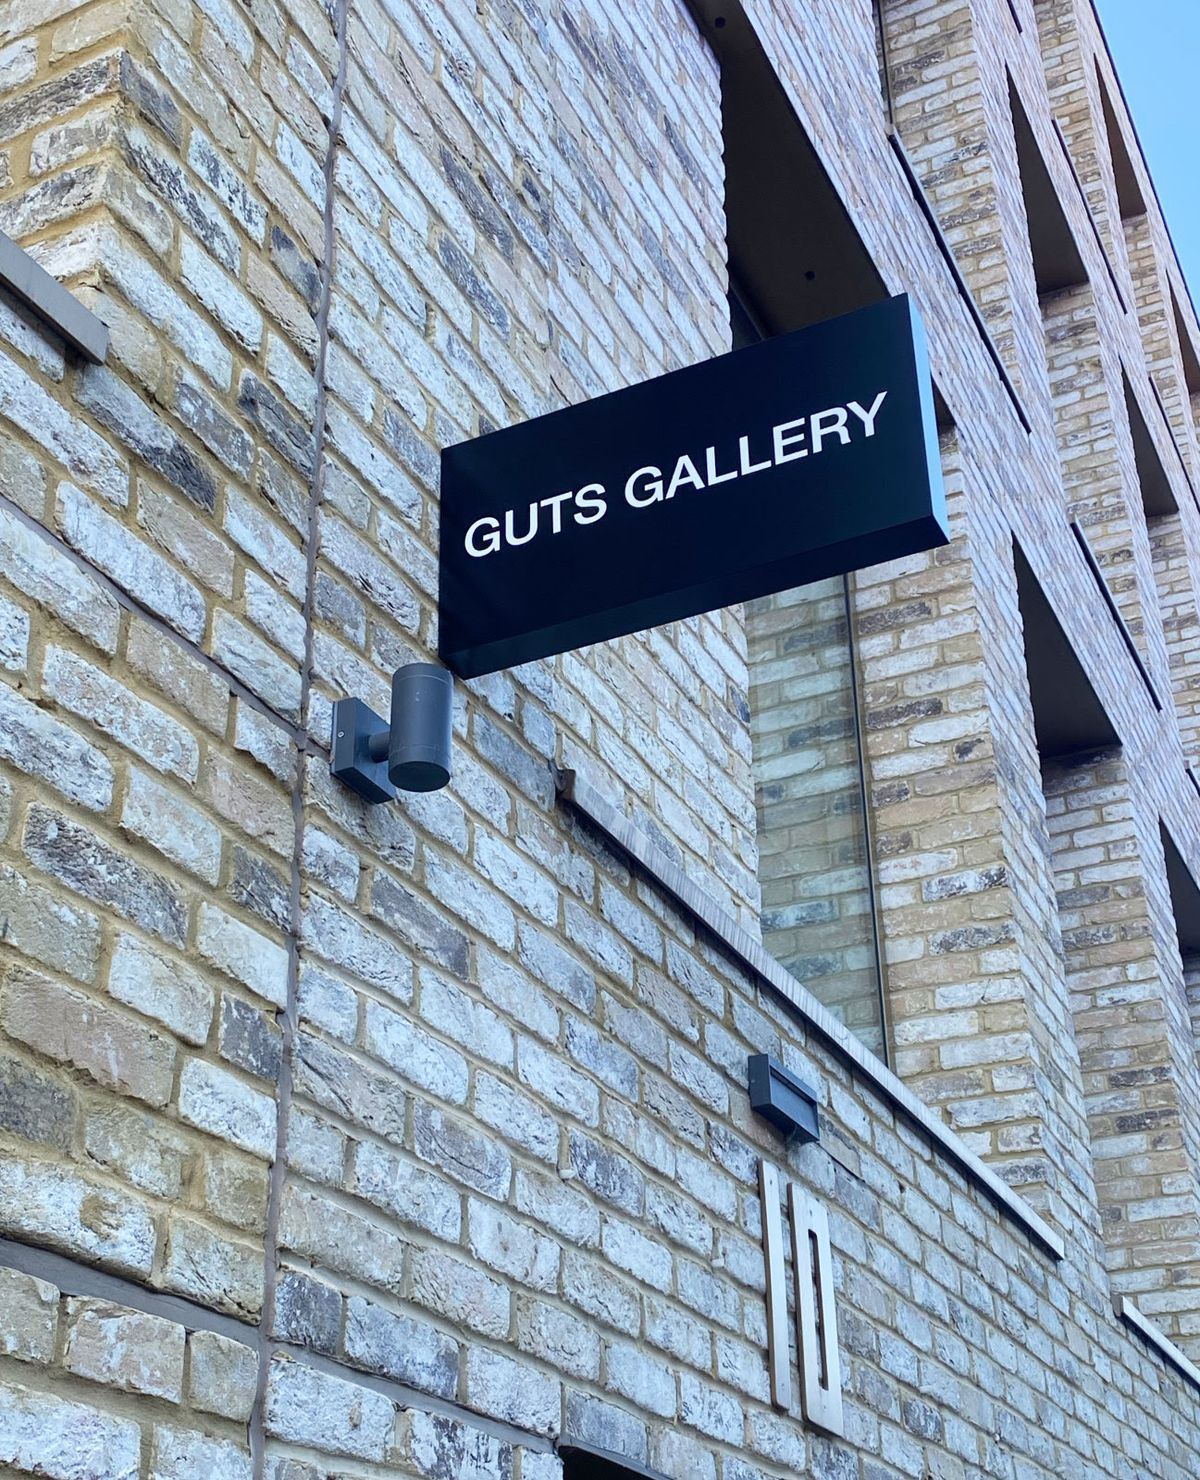 Guts Gallery HQ has moved to a permanent space in Hackney, London